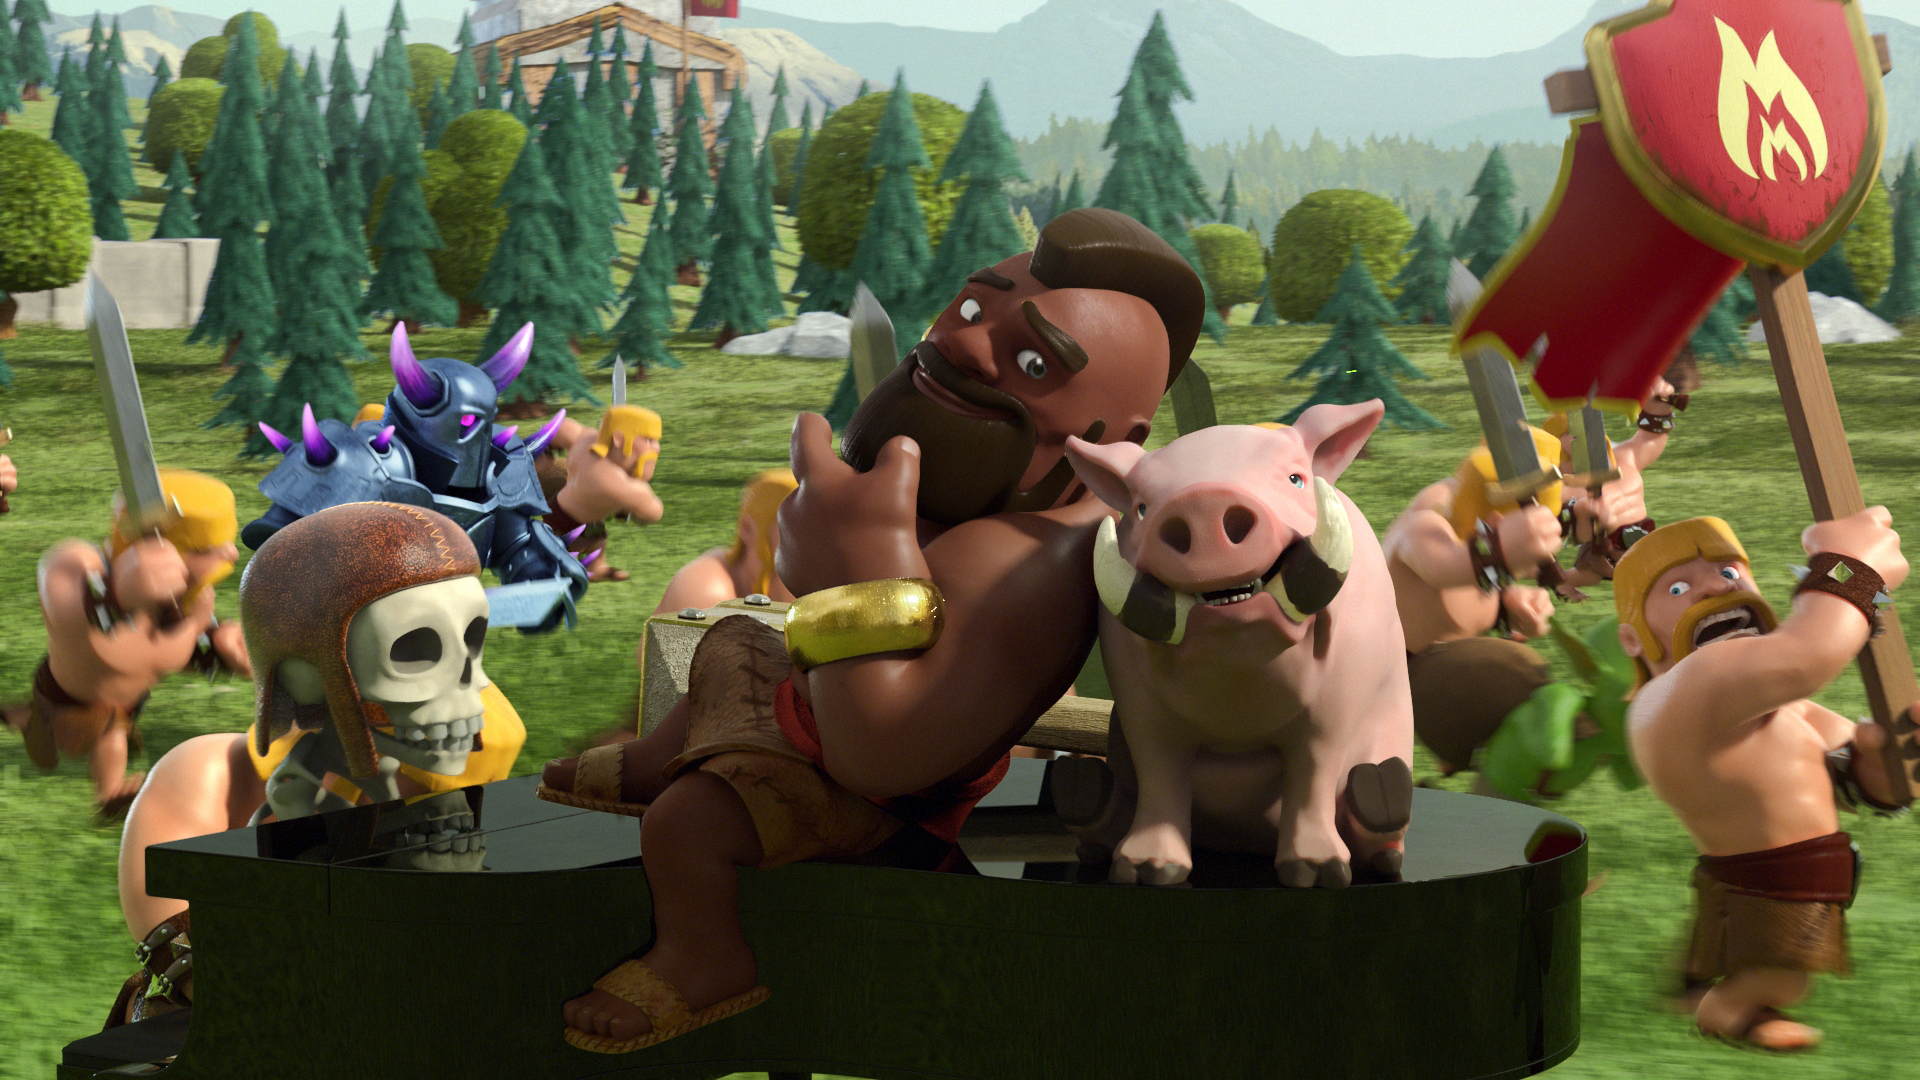 Funny Clash Of Clans Wallpaper - Clash Of Clans Hd Backgrounds , HD Wallpaper & Backgrounds